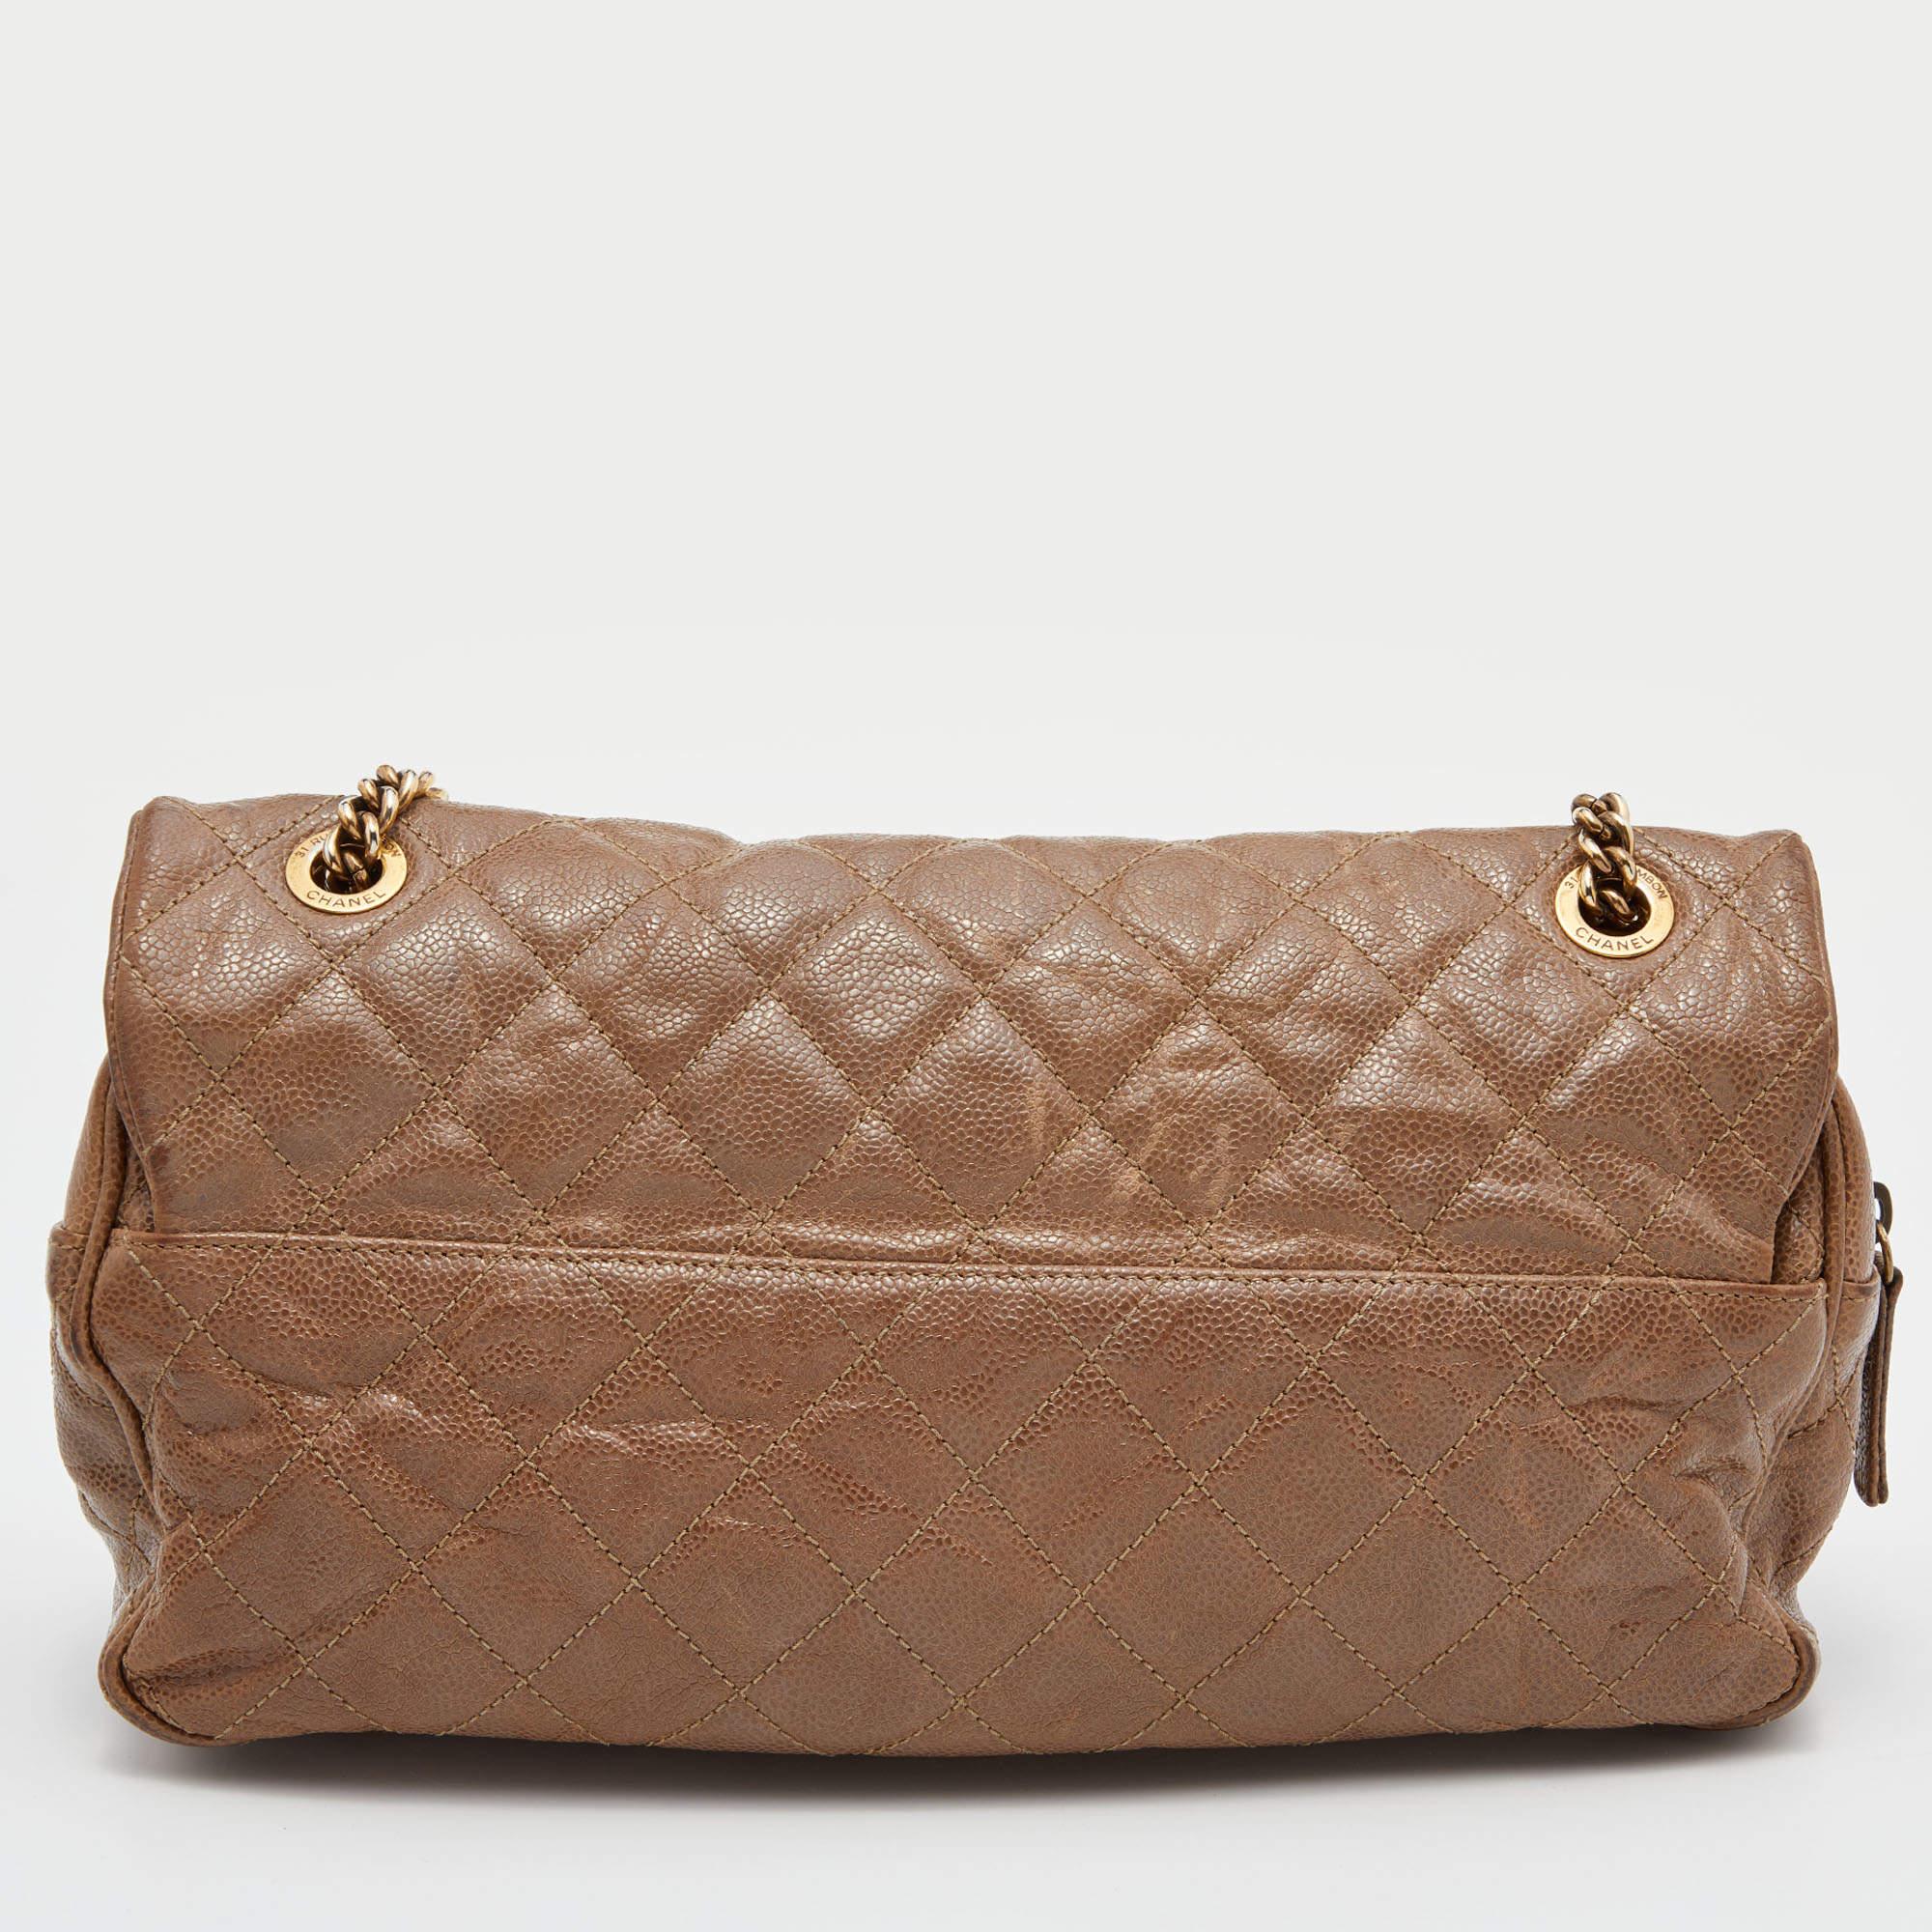 The house of Chanel offers this beautiful Maxi Shiva Flap bag to help you create timeless style edits every season. Crafted using brown leather and added with iconic details, this piece will put a touch of luxury to any edit.

